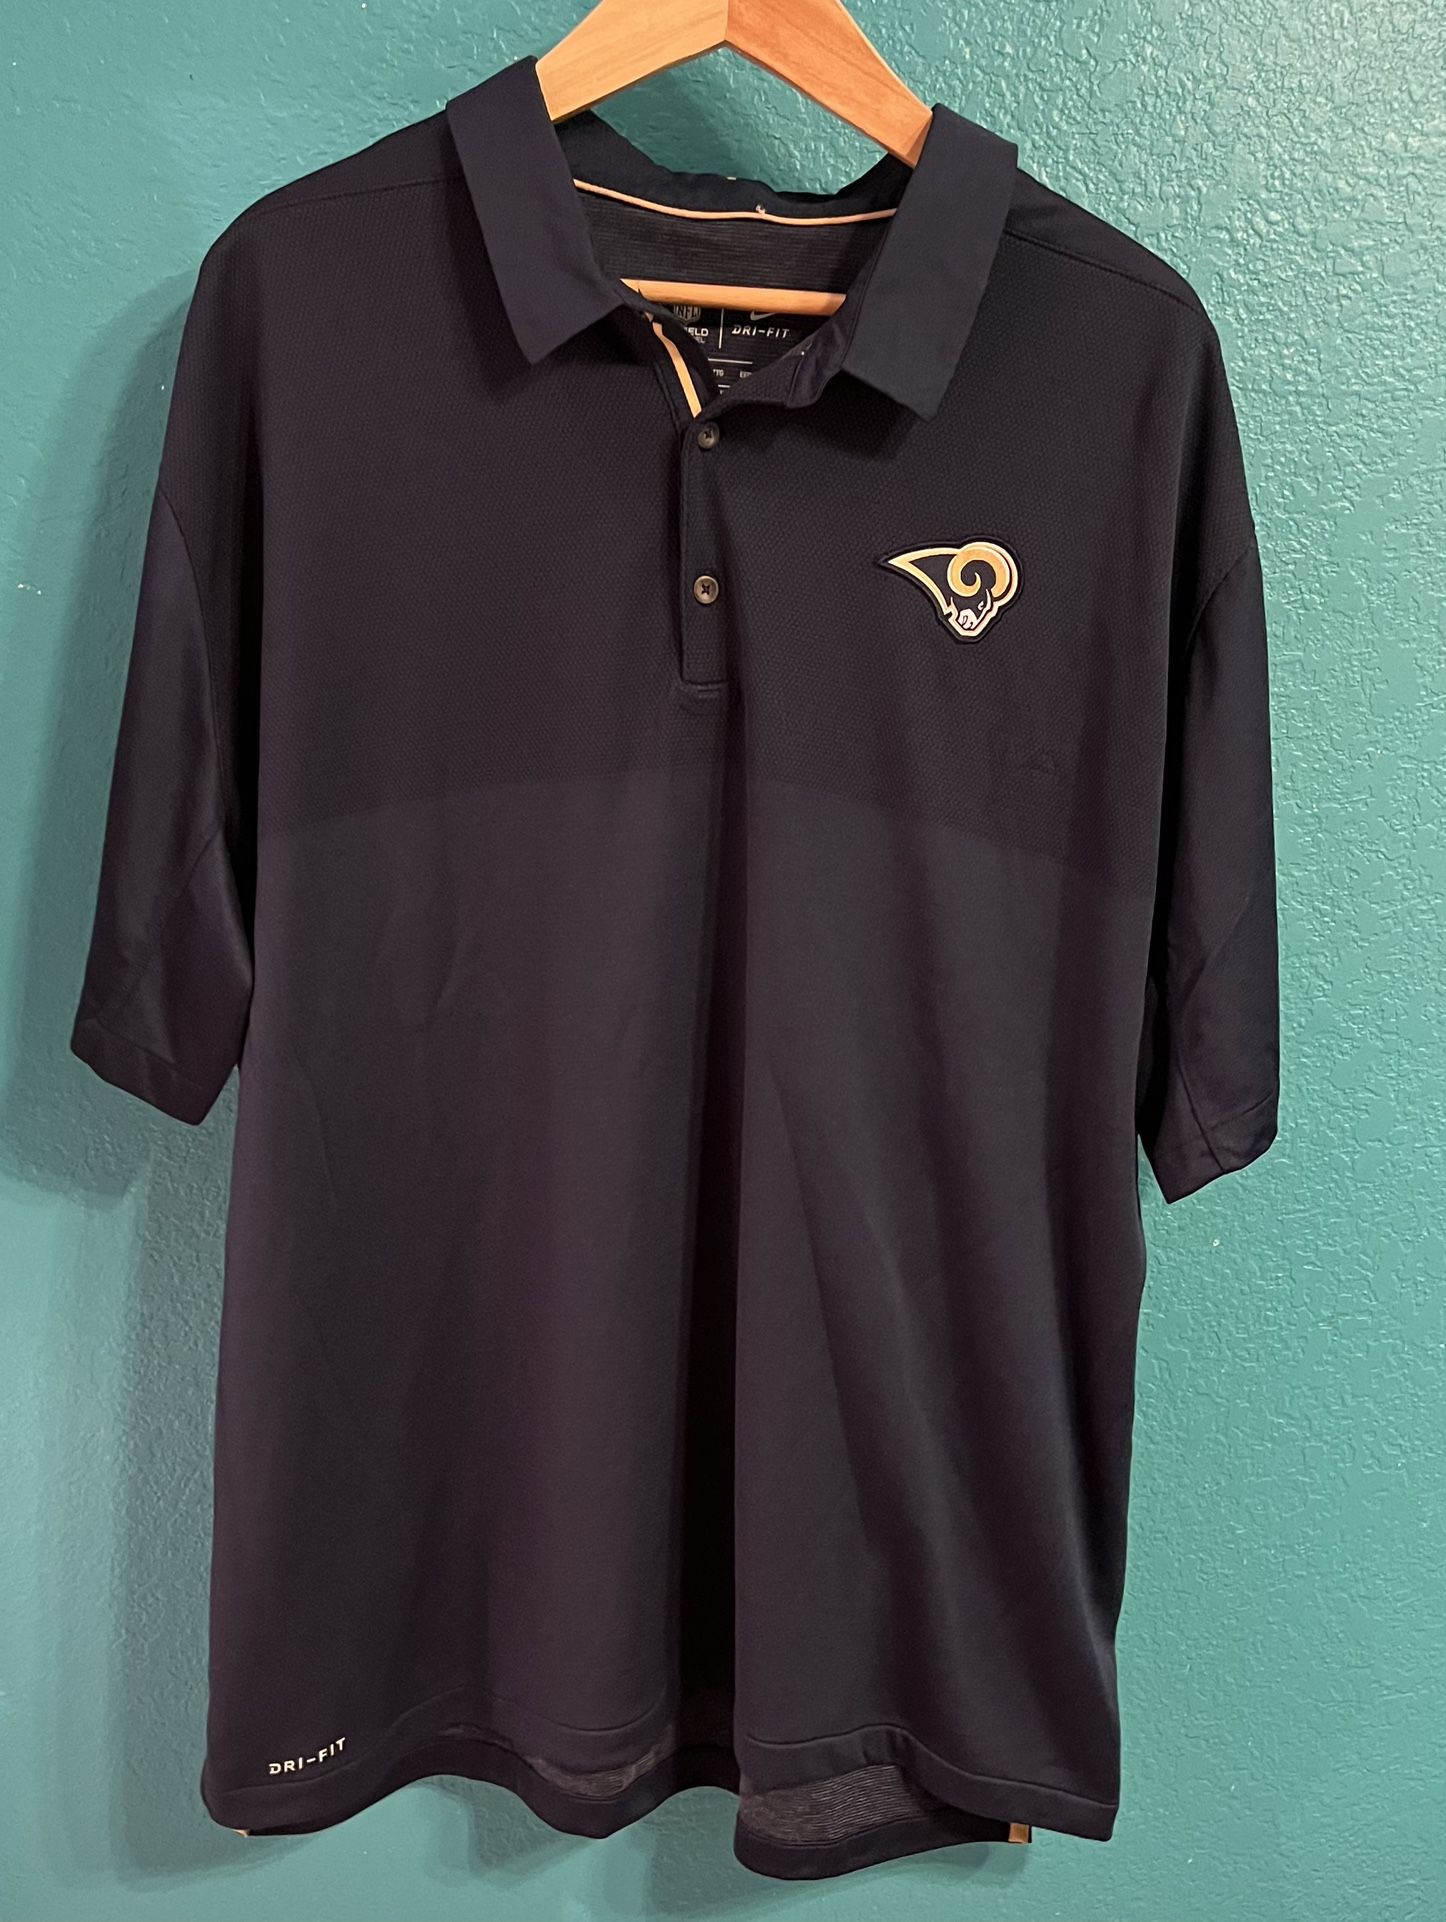 Los Angeles Rams NFL Football Polo Shirt Mens 2XL for Sale in San Antonio,  TX - OfferUp